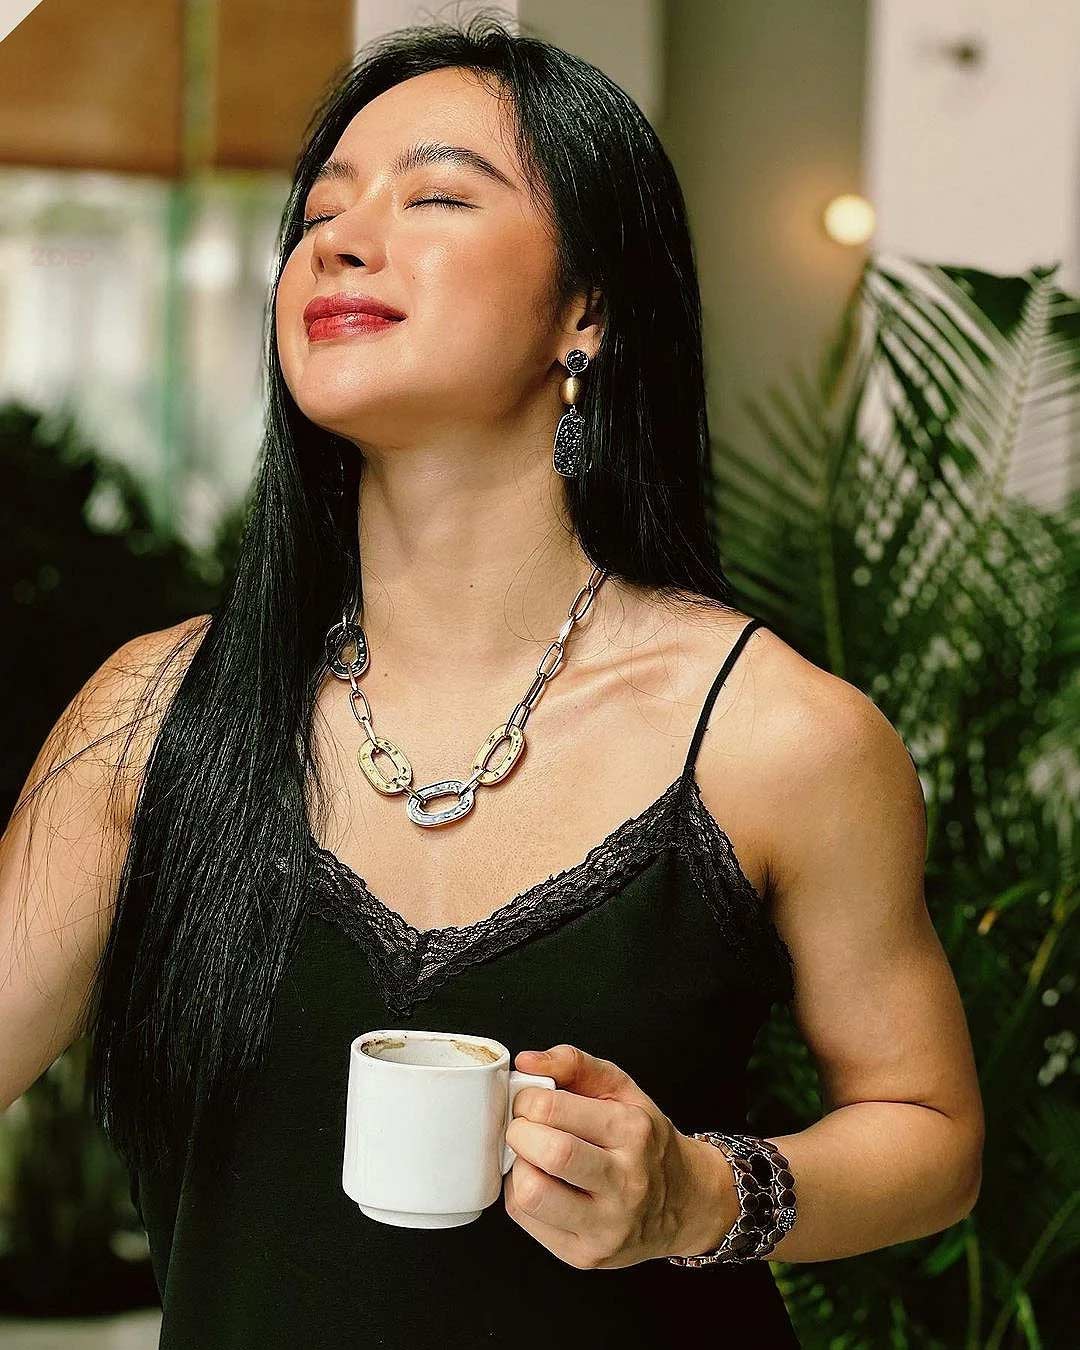 Angela Phuong Trinh lifts weights of nearly 300 kg, her muscular muscles make men " completely out of their mind"  - first